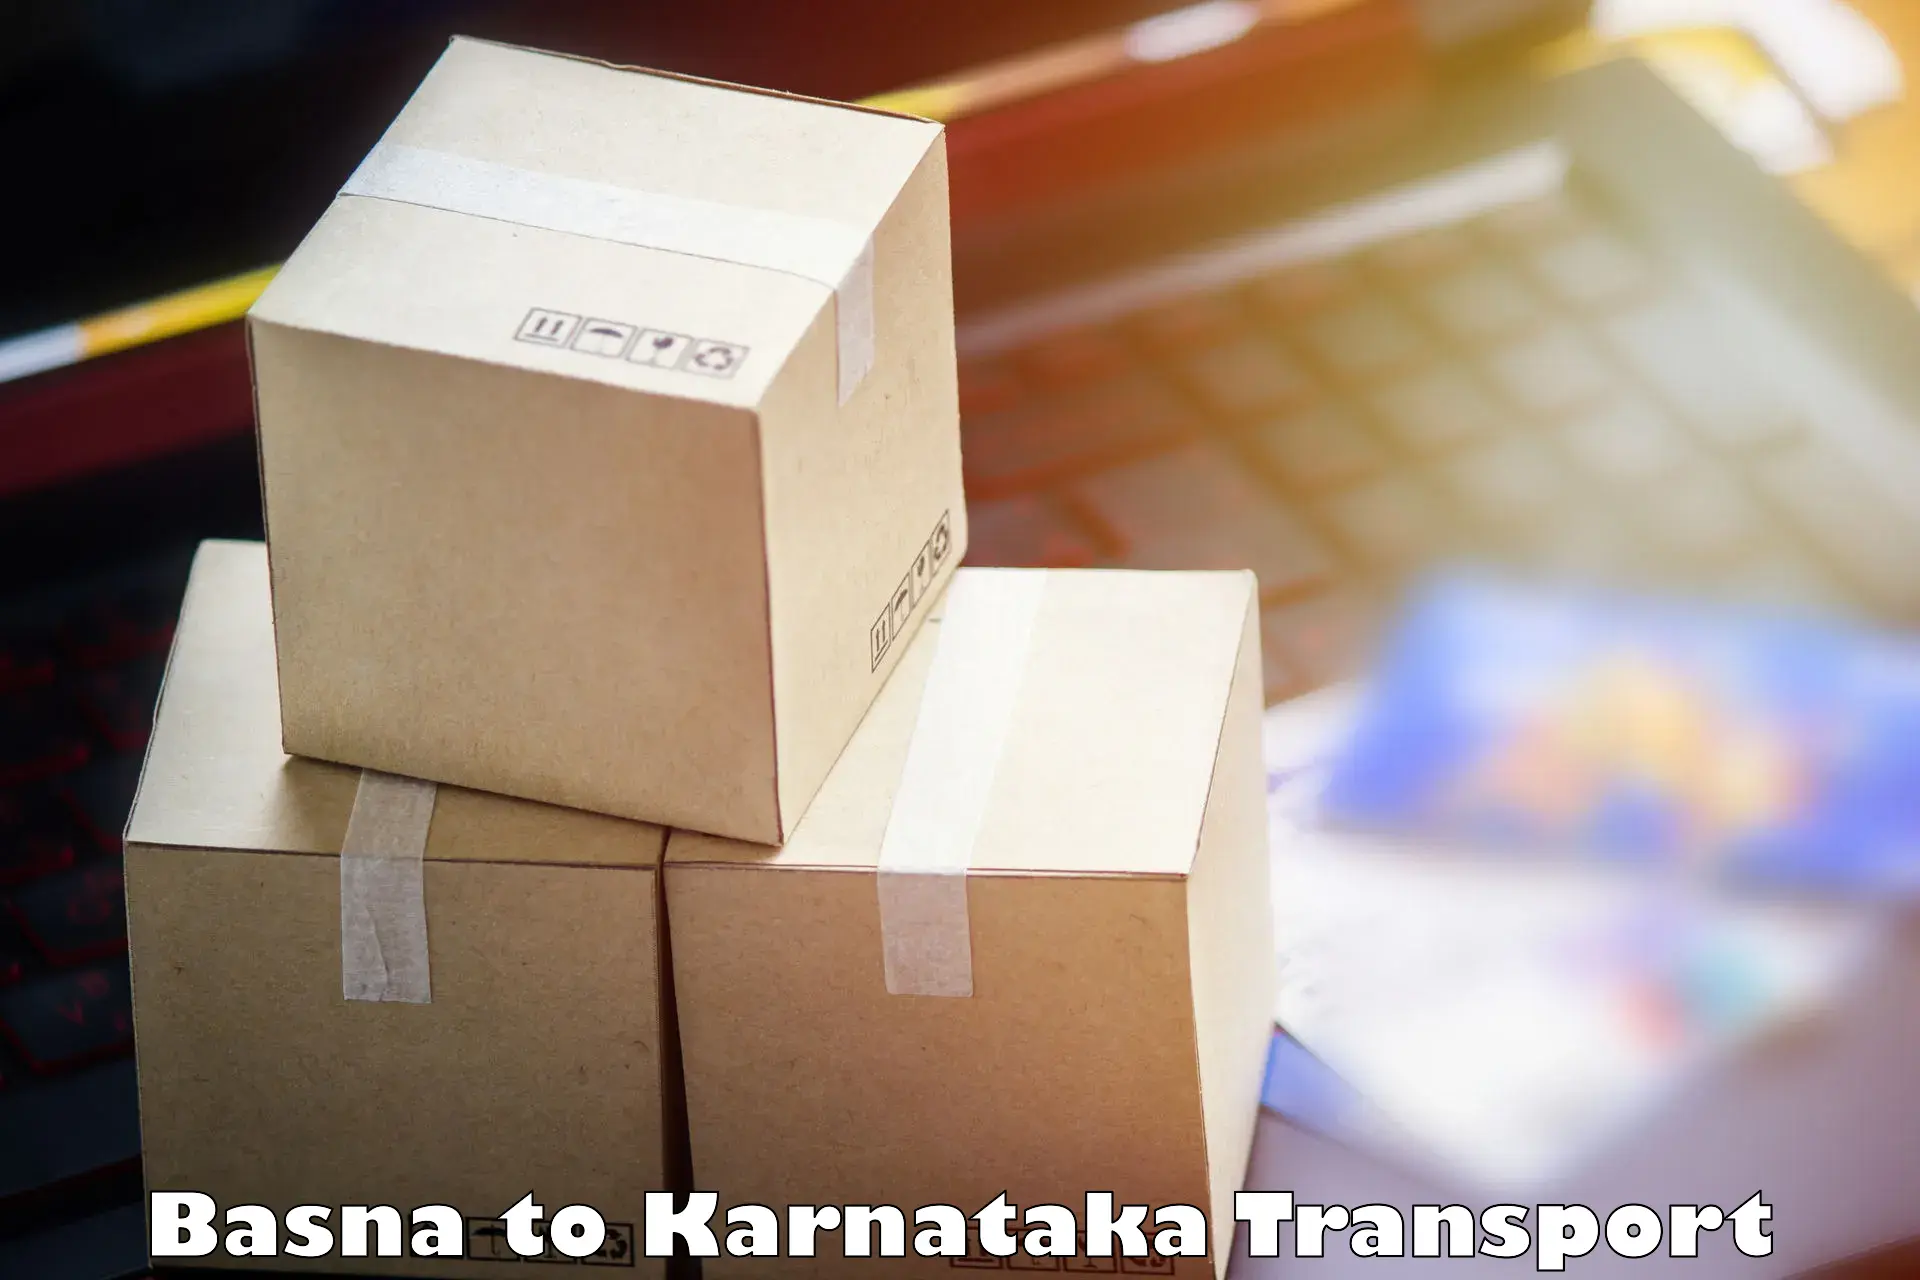 Truck transport companies in India Basna to Koppal